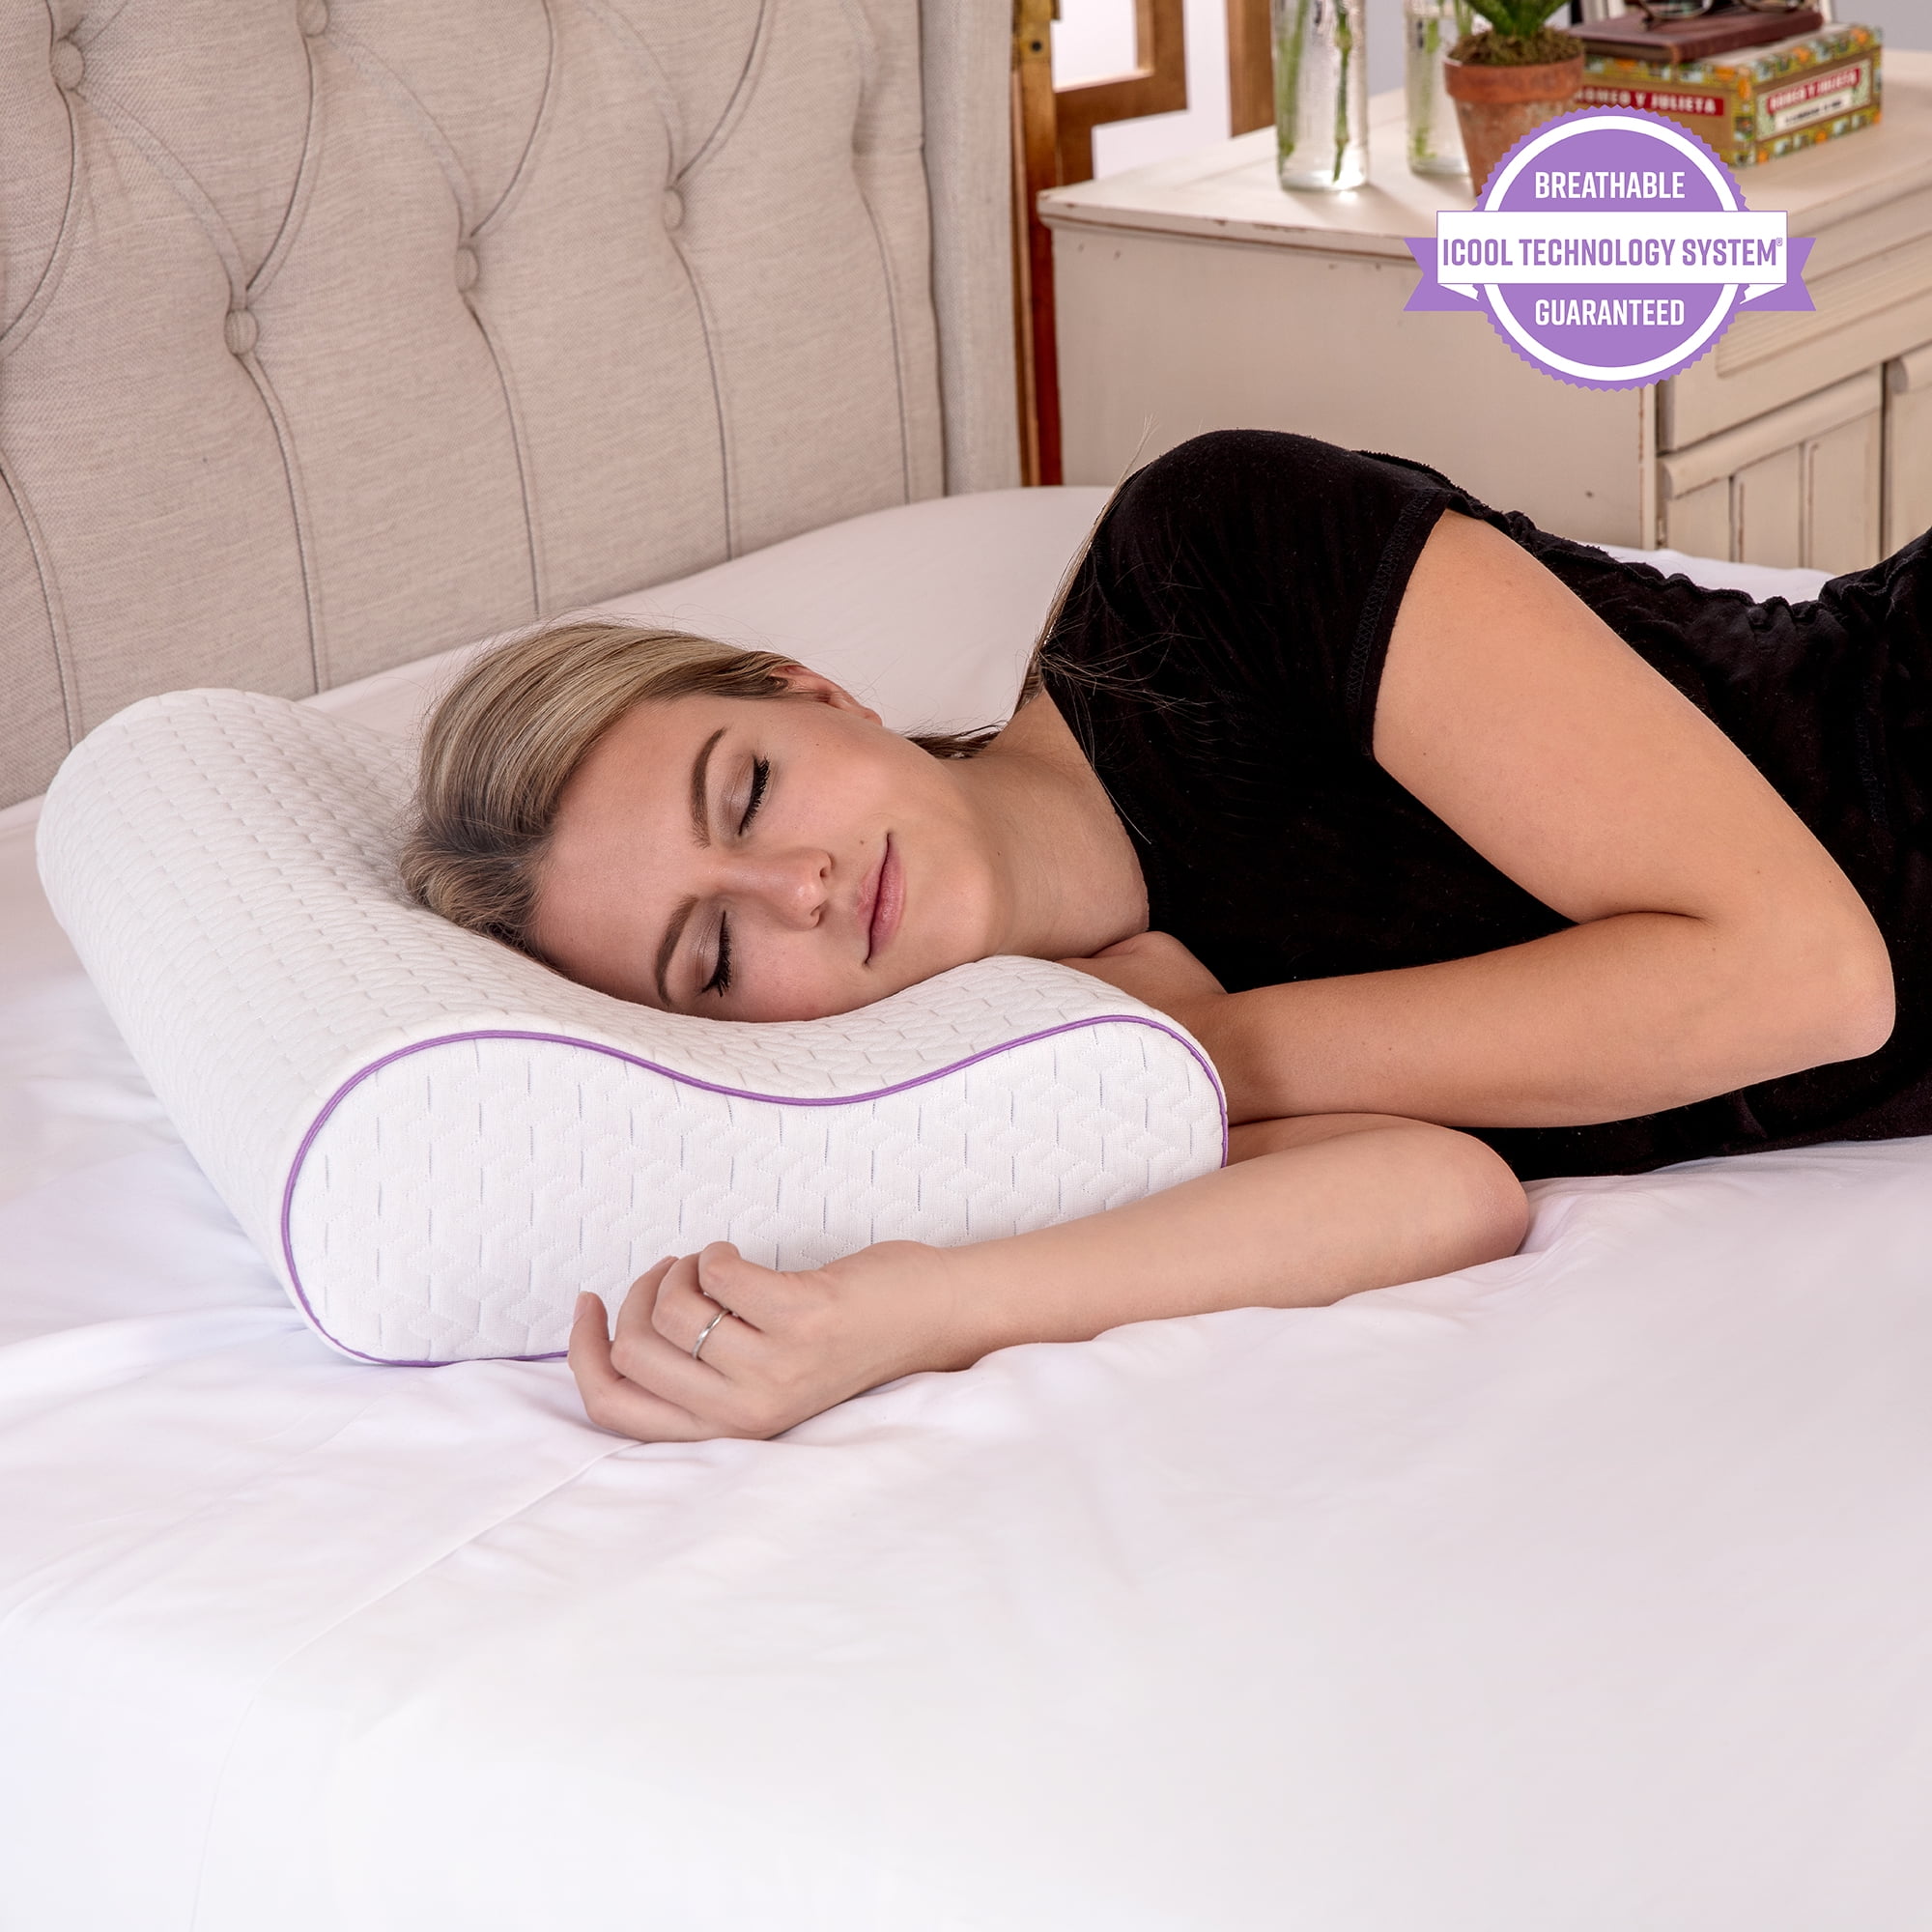 SomaSleep Cooling Pillow for Hot Sleepers by SelectSoma - Curved Side